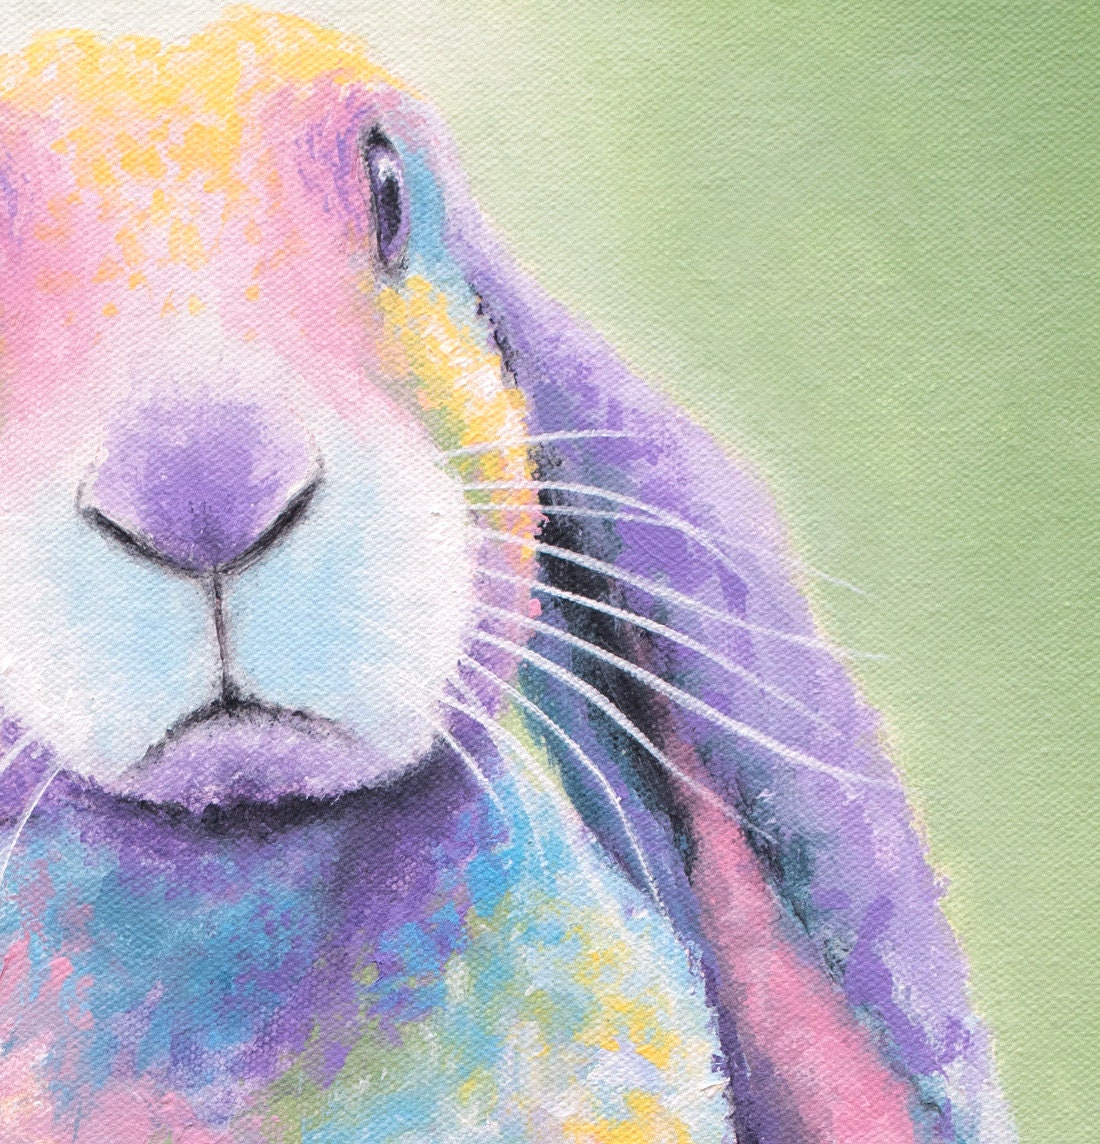 Rabbit Art Print on PAPER or CANVAS. English Lop Rabbit Standing. Pastel Bunny with Easter Colors. Rabbit Gifts. Painting by Krystle Cole